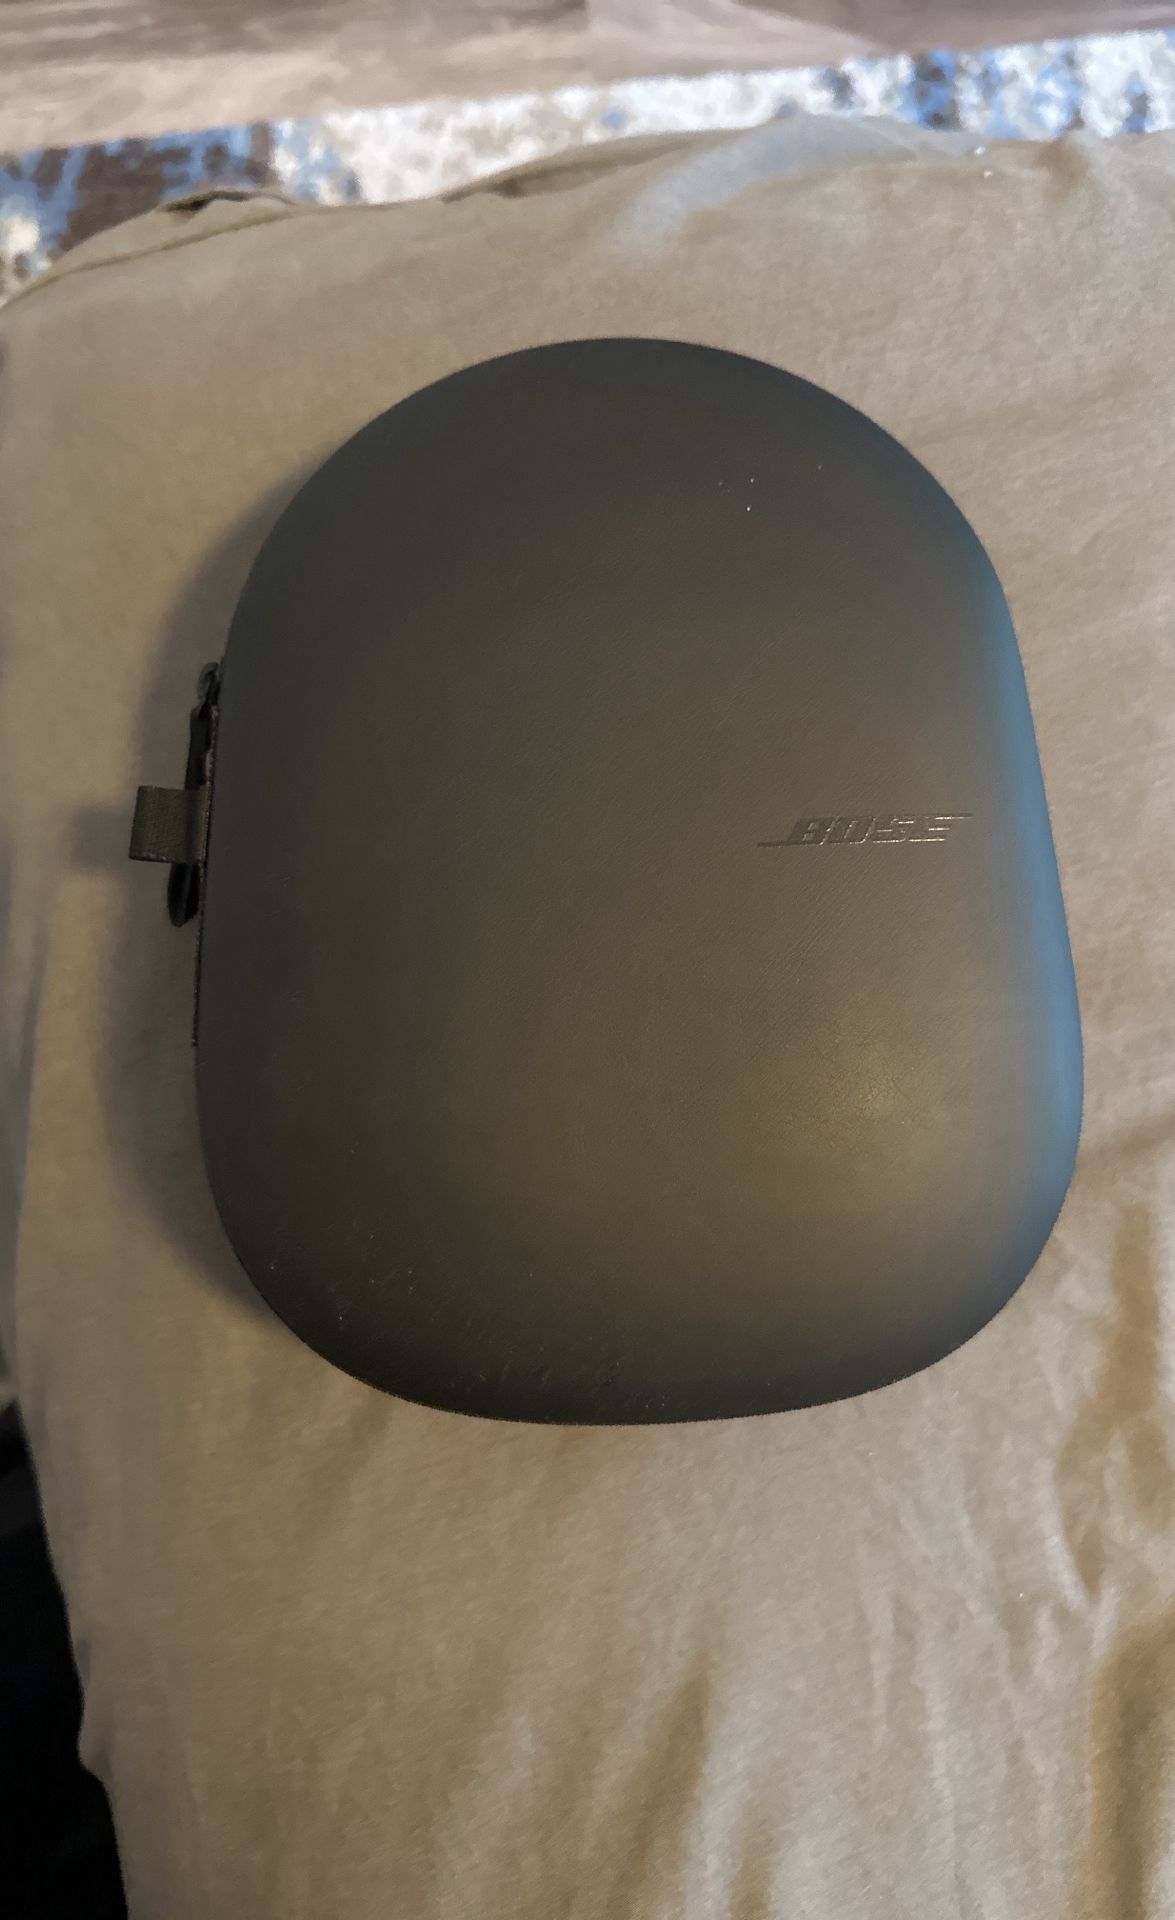 Bose 700 With Charging Case.